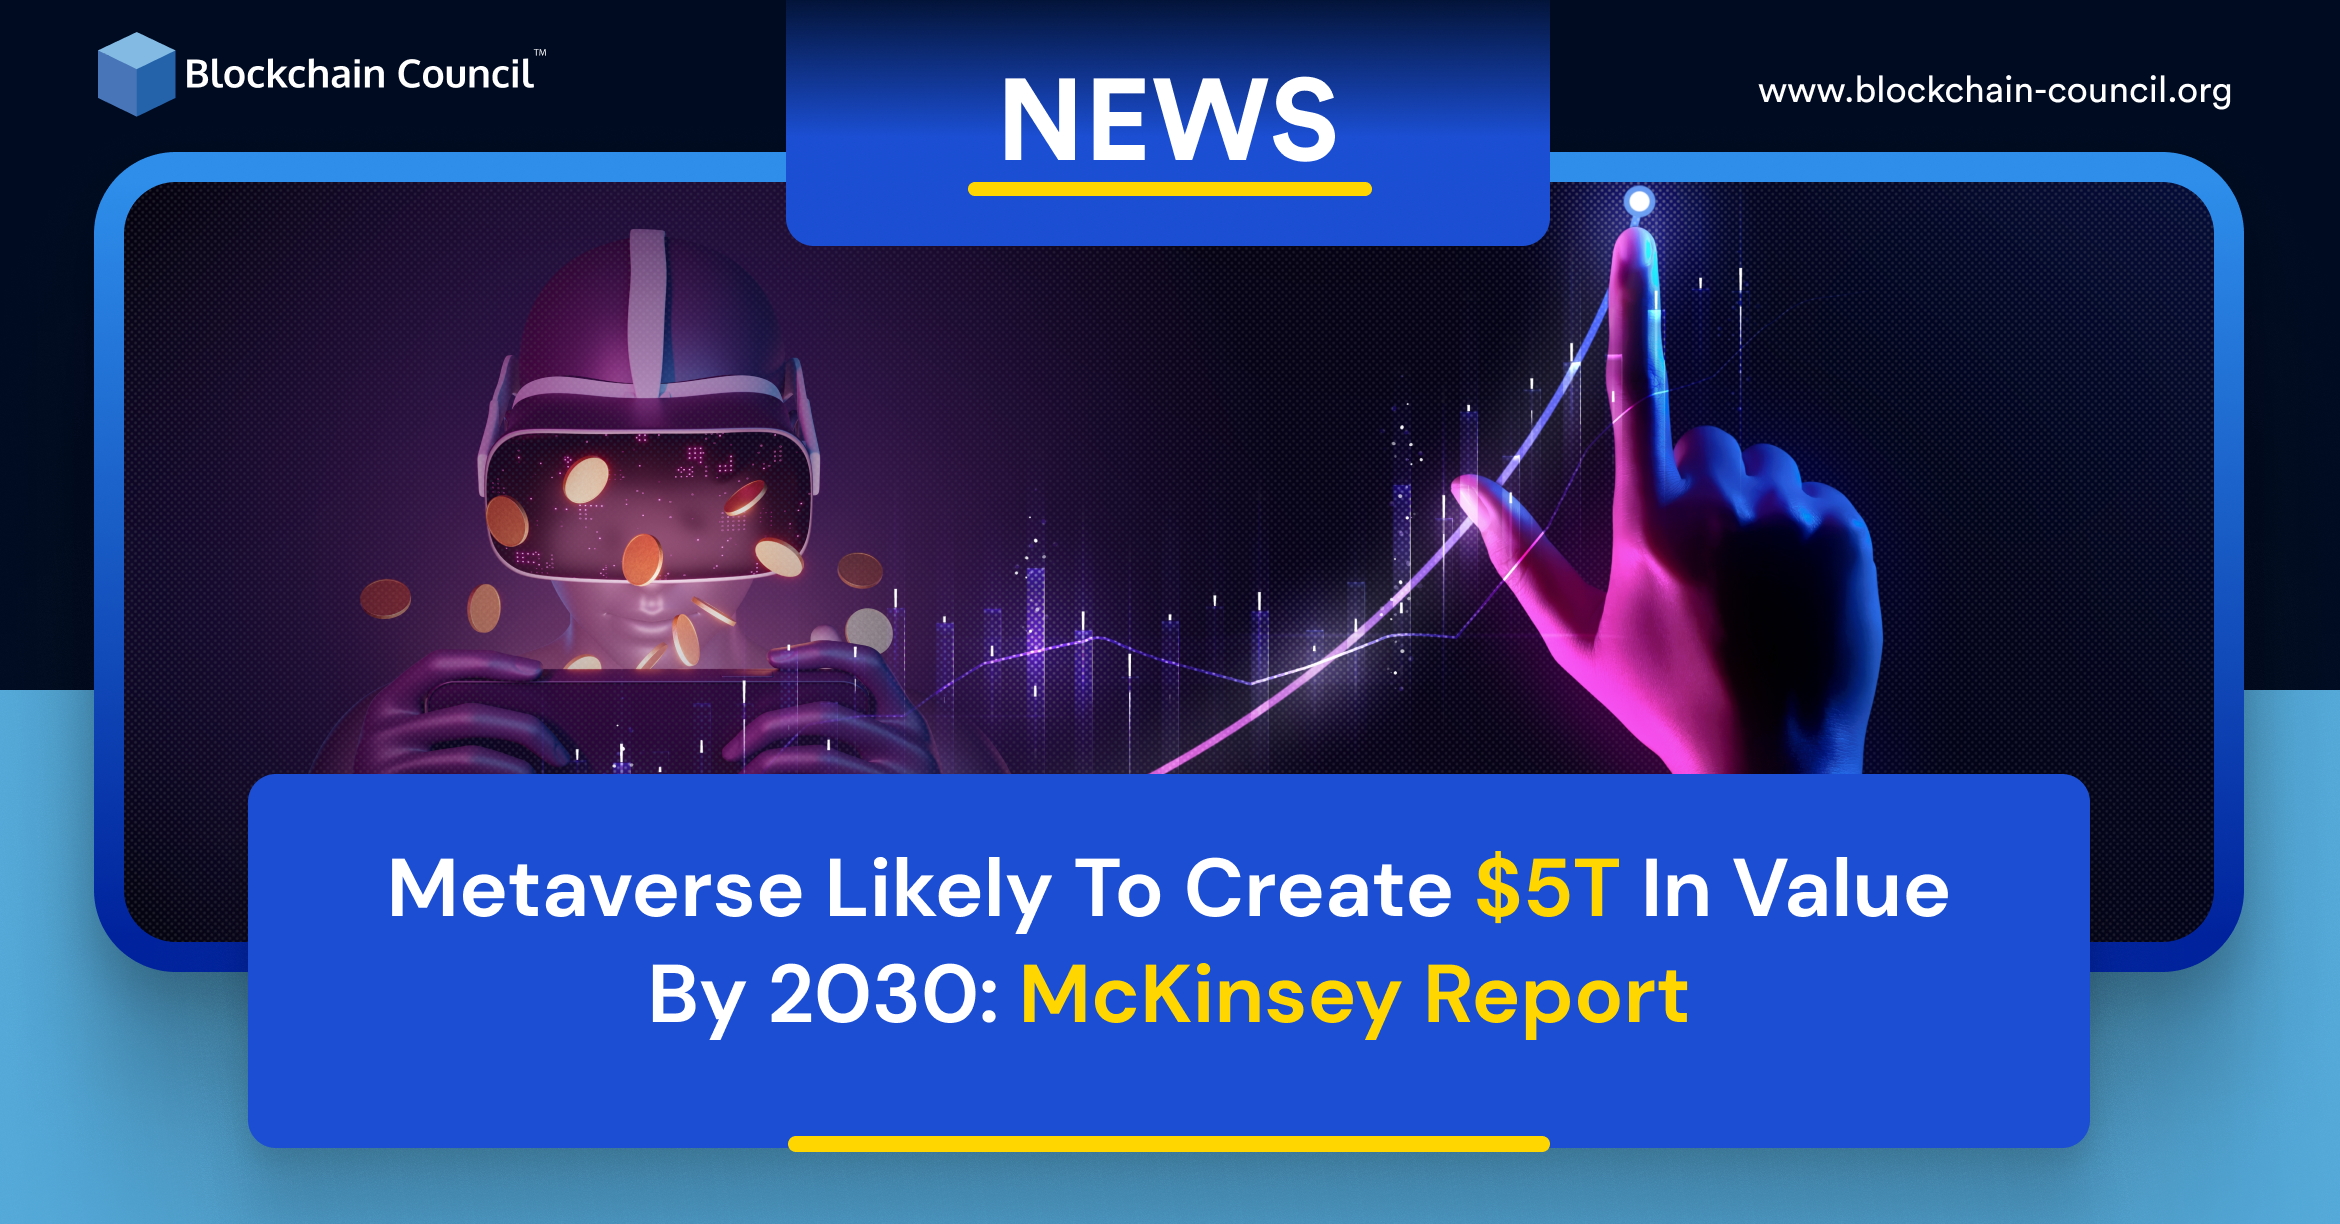 Metaverse Likely To Create $5T In Value By 2030: McKinsey Report